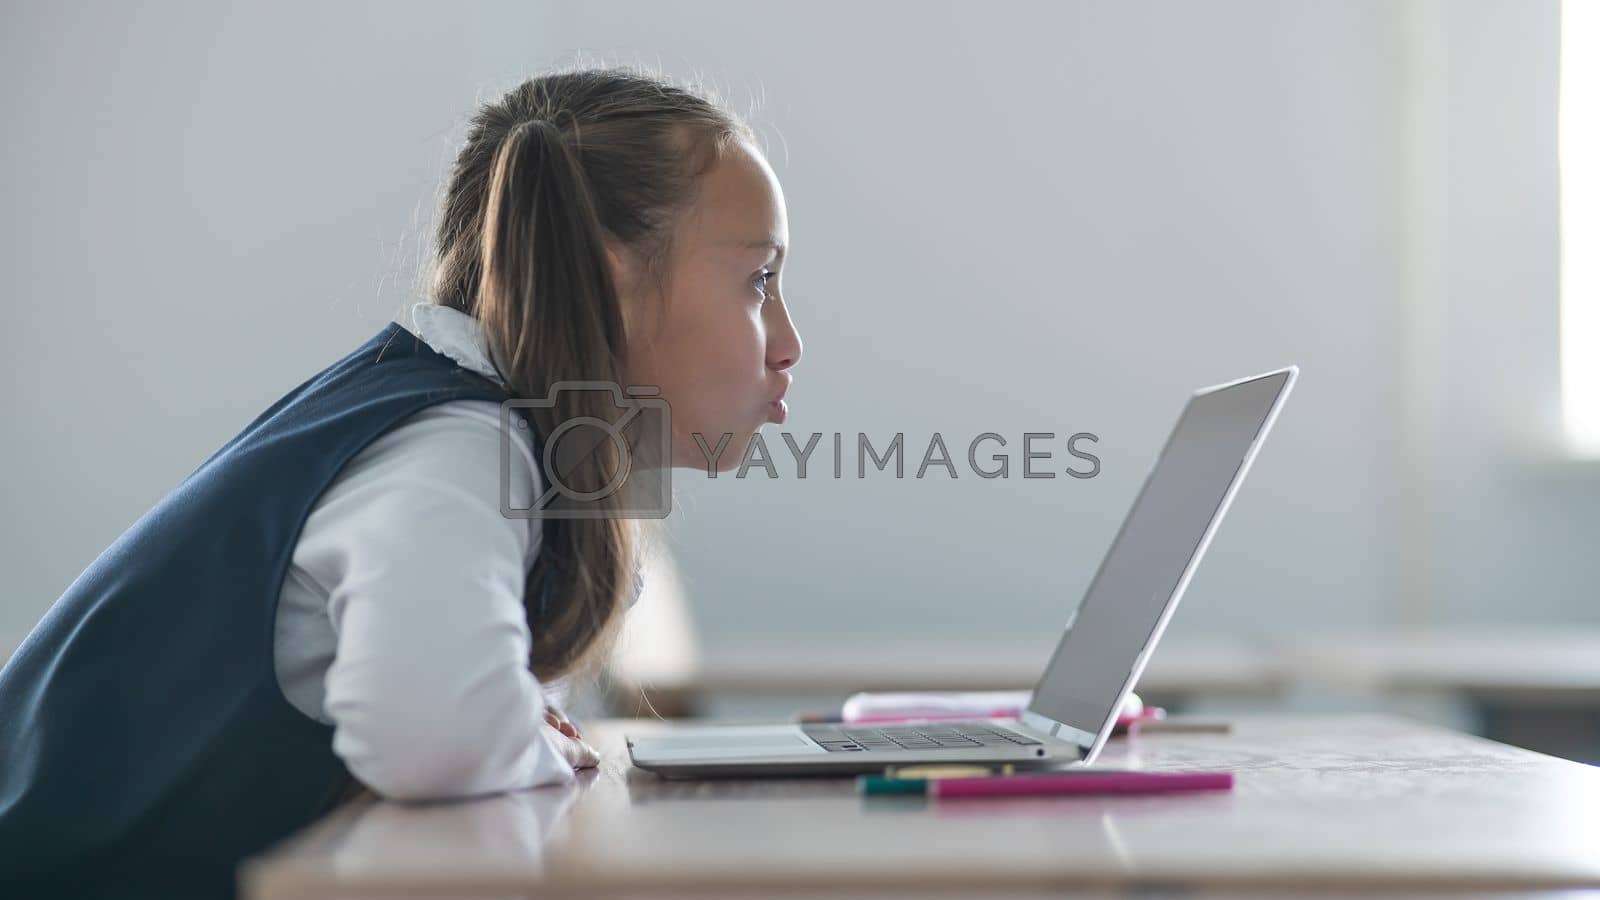 Royalty free image of Caucasian girl communicates via video communication on a laptop while sitting at a school desk. by mrwed54